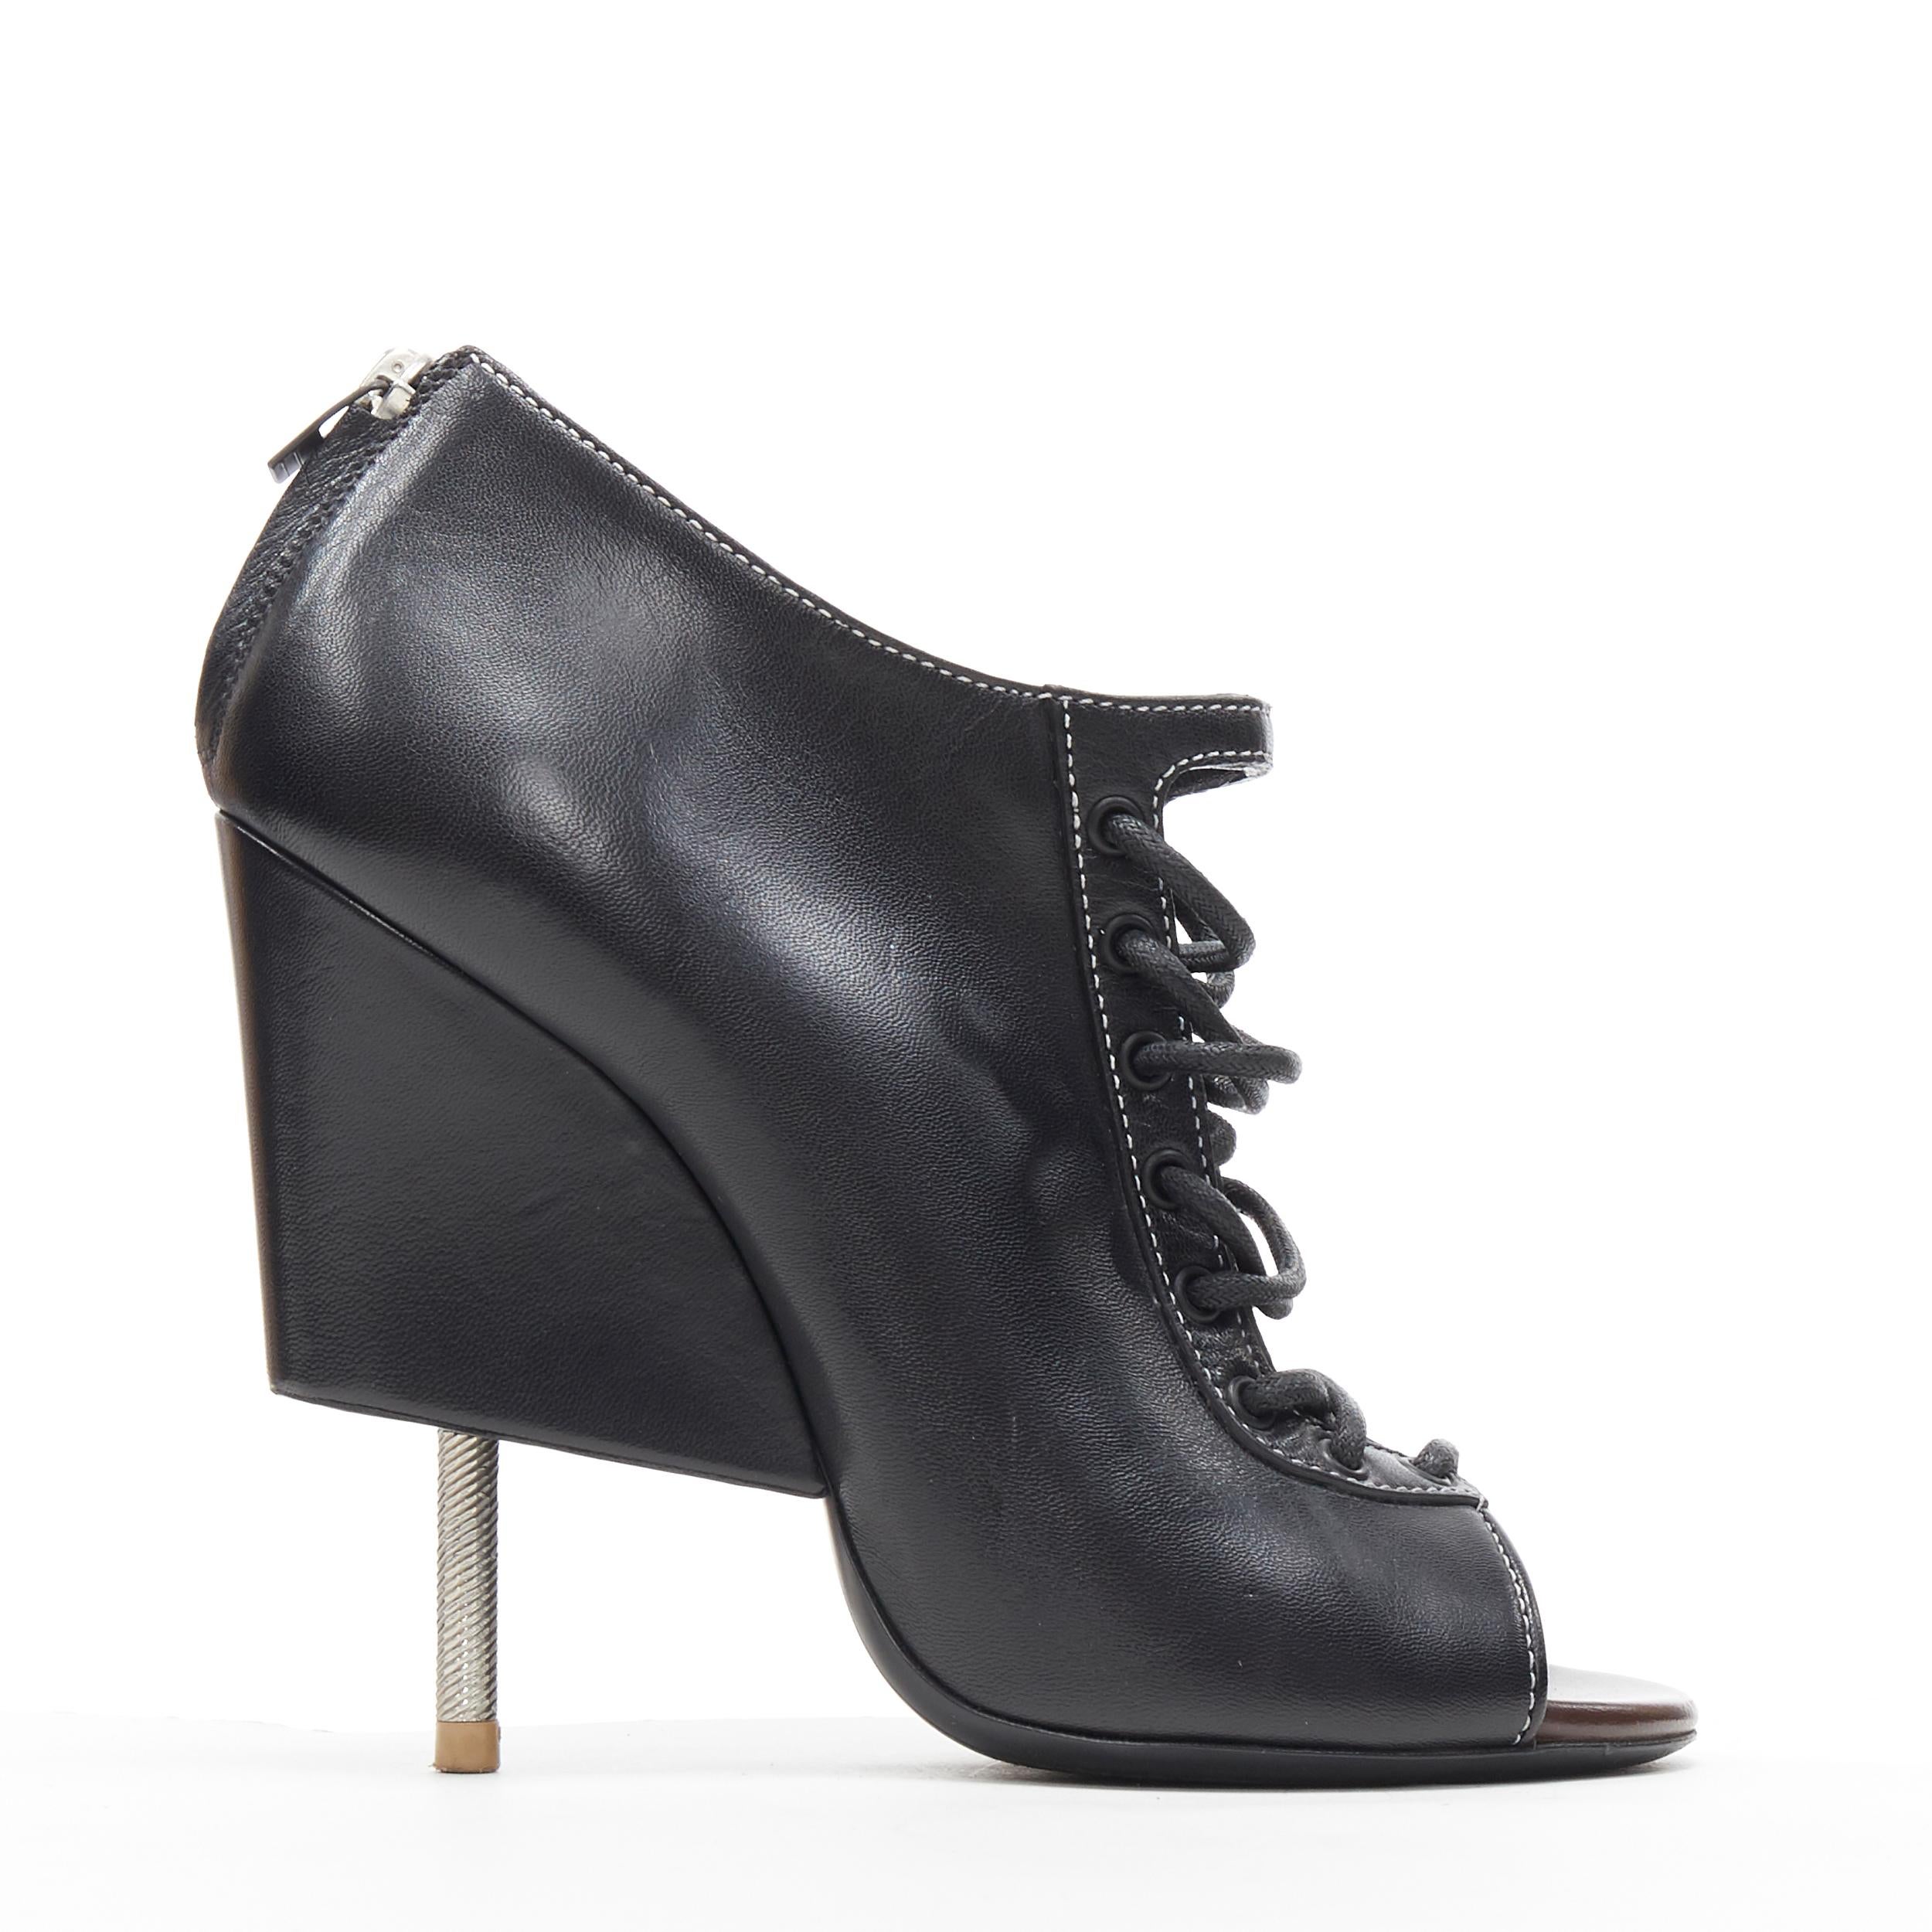 runway GIVENCHY TISCI black lace up open toe angular nail heel bootie EU38 
Brand: Givenchy
Designer: Riccardo Tisci
Model Name / Style: Bootie
Material: Leather
Color: Black
Pattern: Solid
Closure: Zip
Extra Detail: Lace front design. Zip back